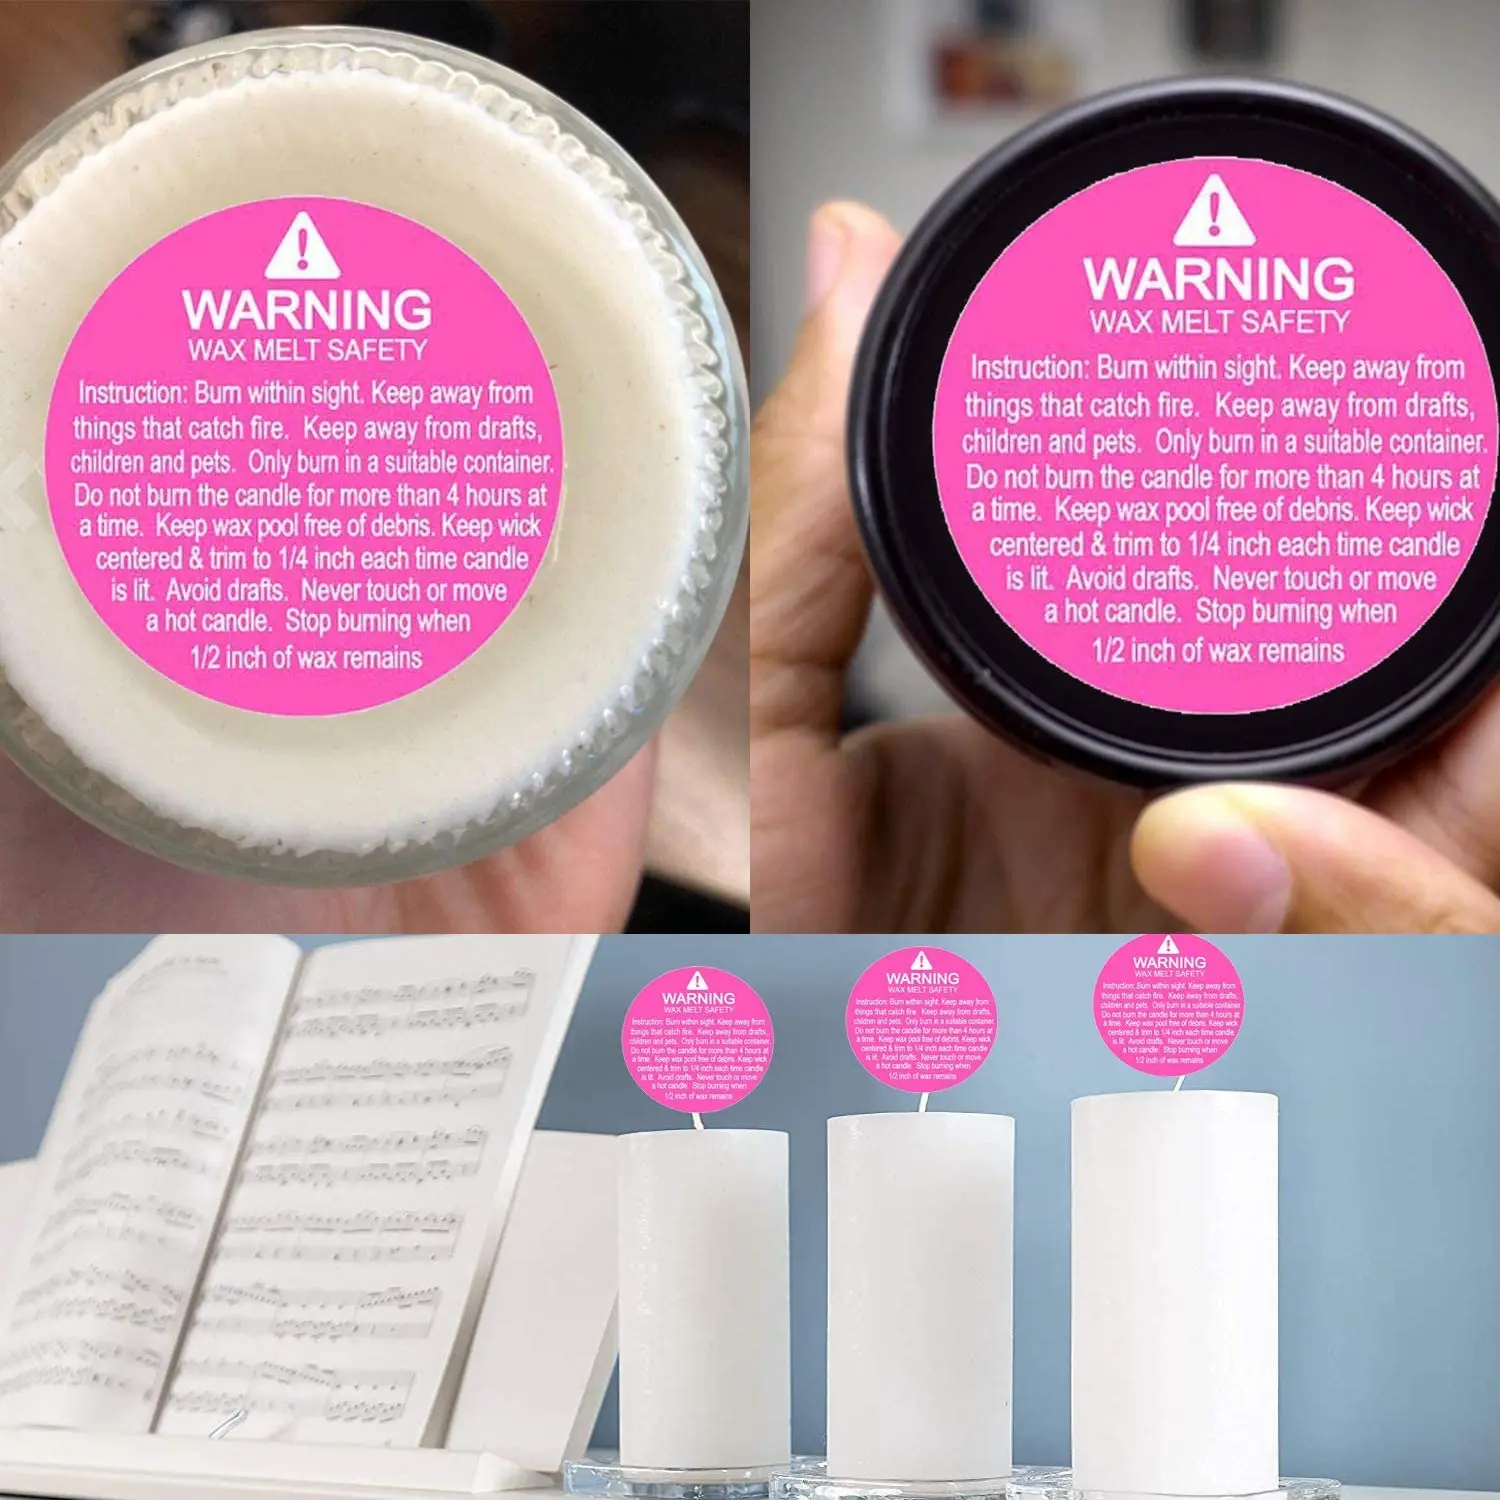 KYONANO Candle Warning Labels 600 Pcs 1.5 inch Candle Jar Container Stickers Waterproof Candle Safety Labels Sticker Decal for Candle Jars,Tins 